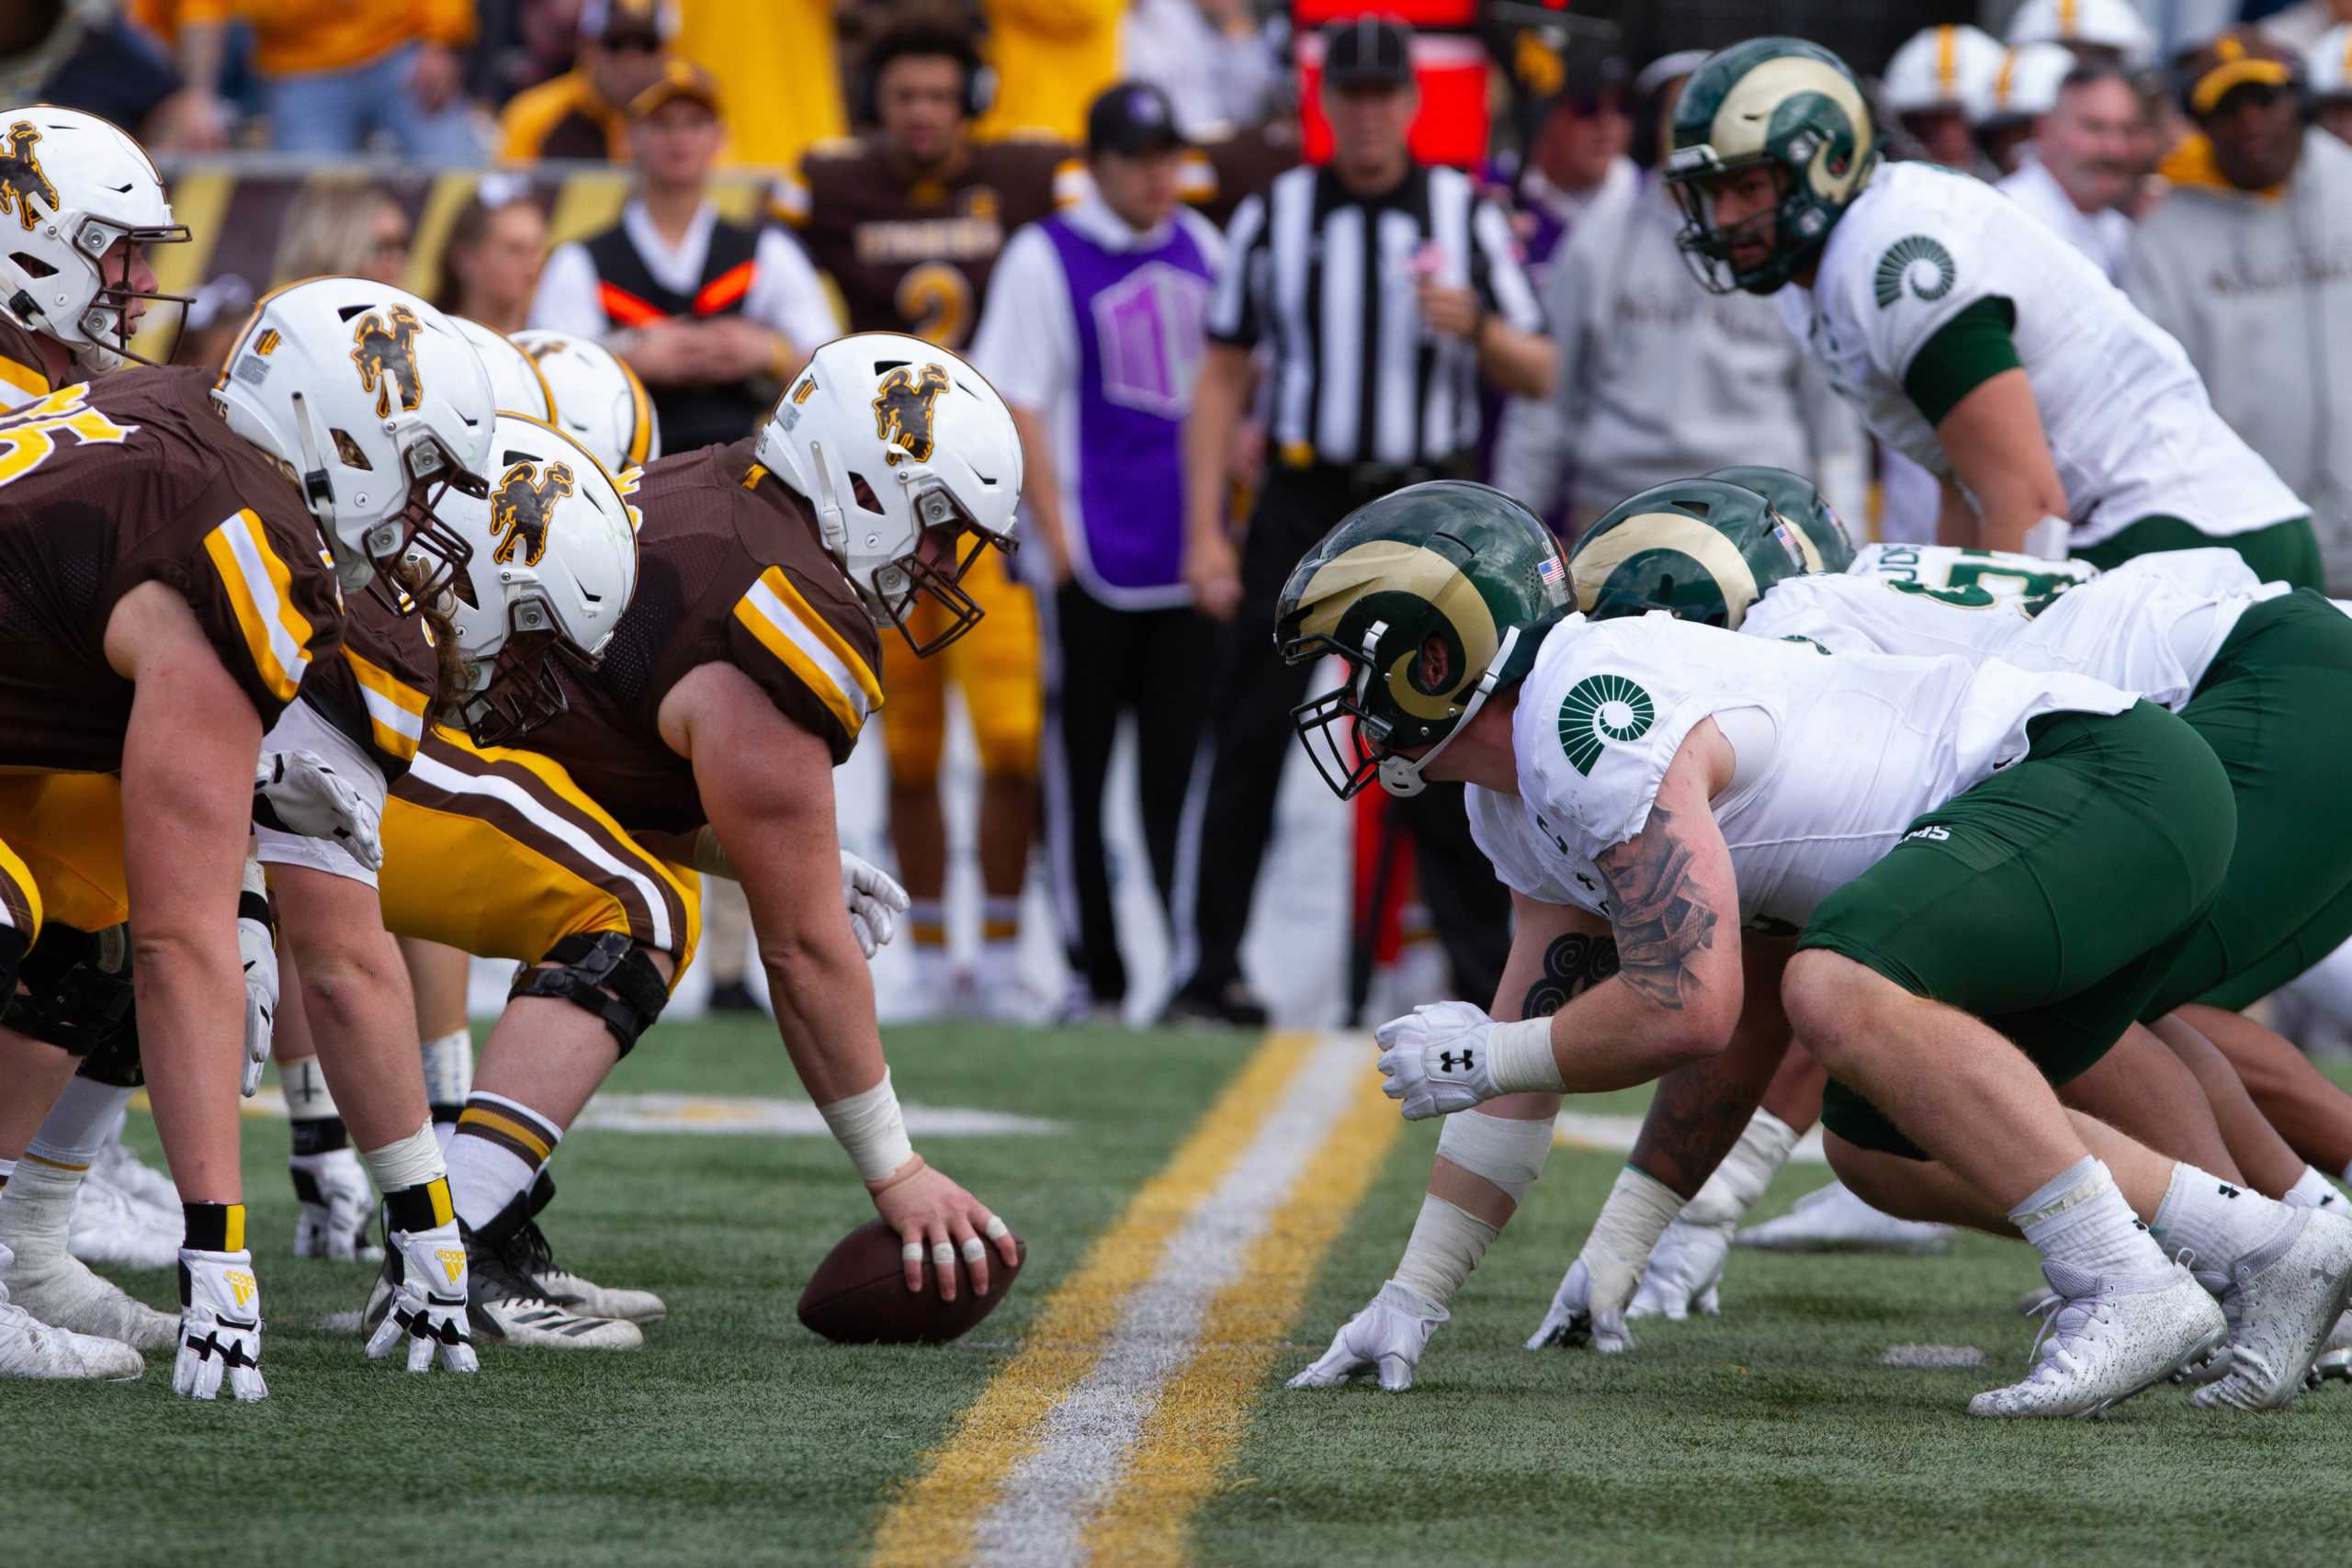 The Offensive and defensive lines of Wyoming and Colorado State respectively line up for a play Nov. 6.